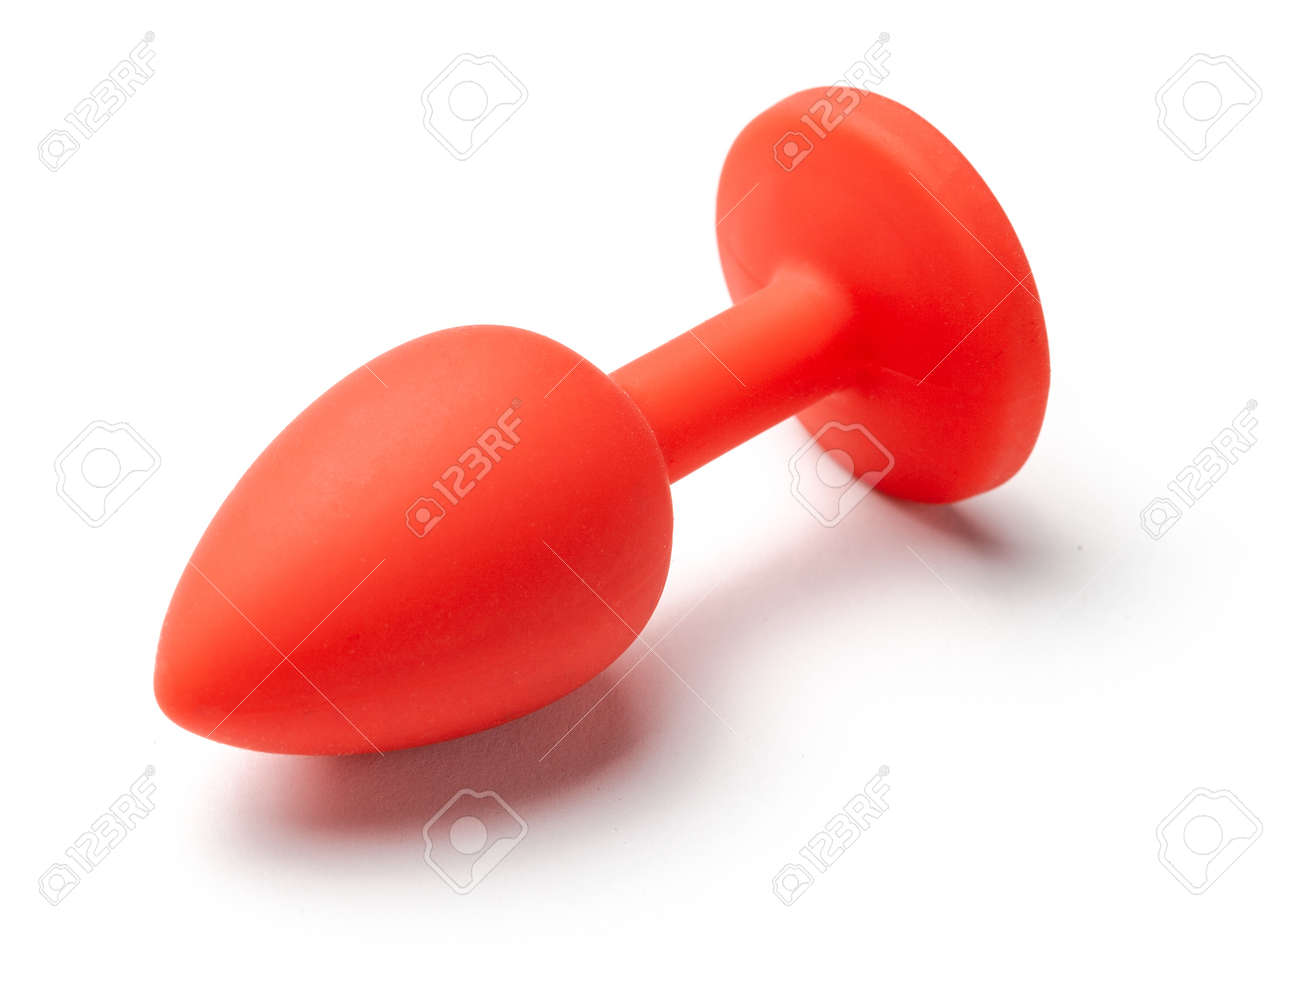 121964910-red-butt-plug-isolated-on-white-background-sex-toys-for-ass.jpg